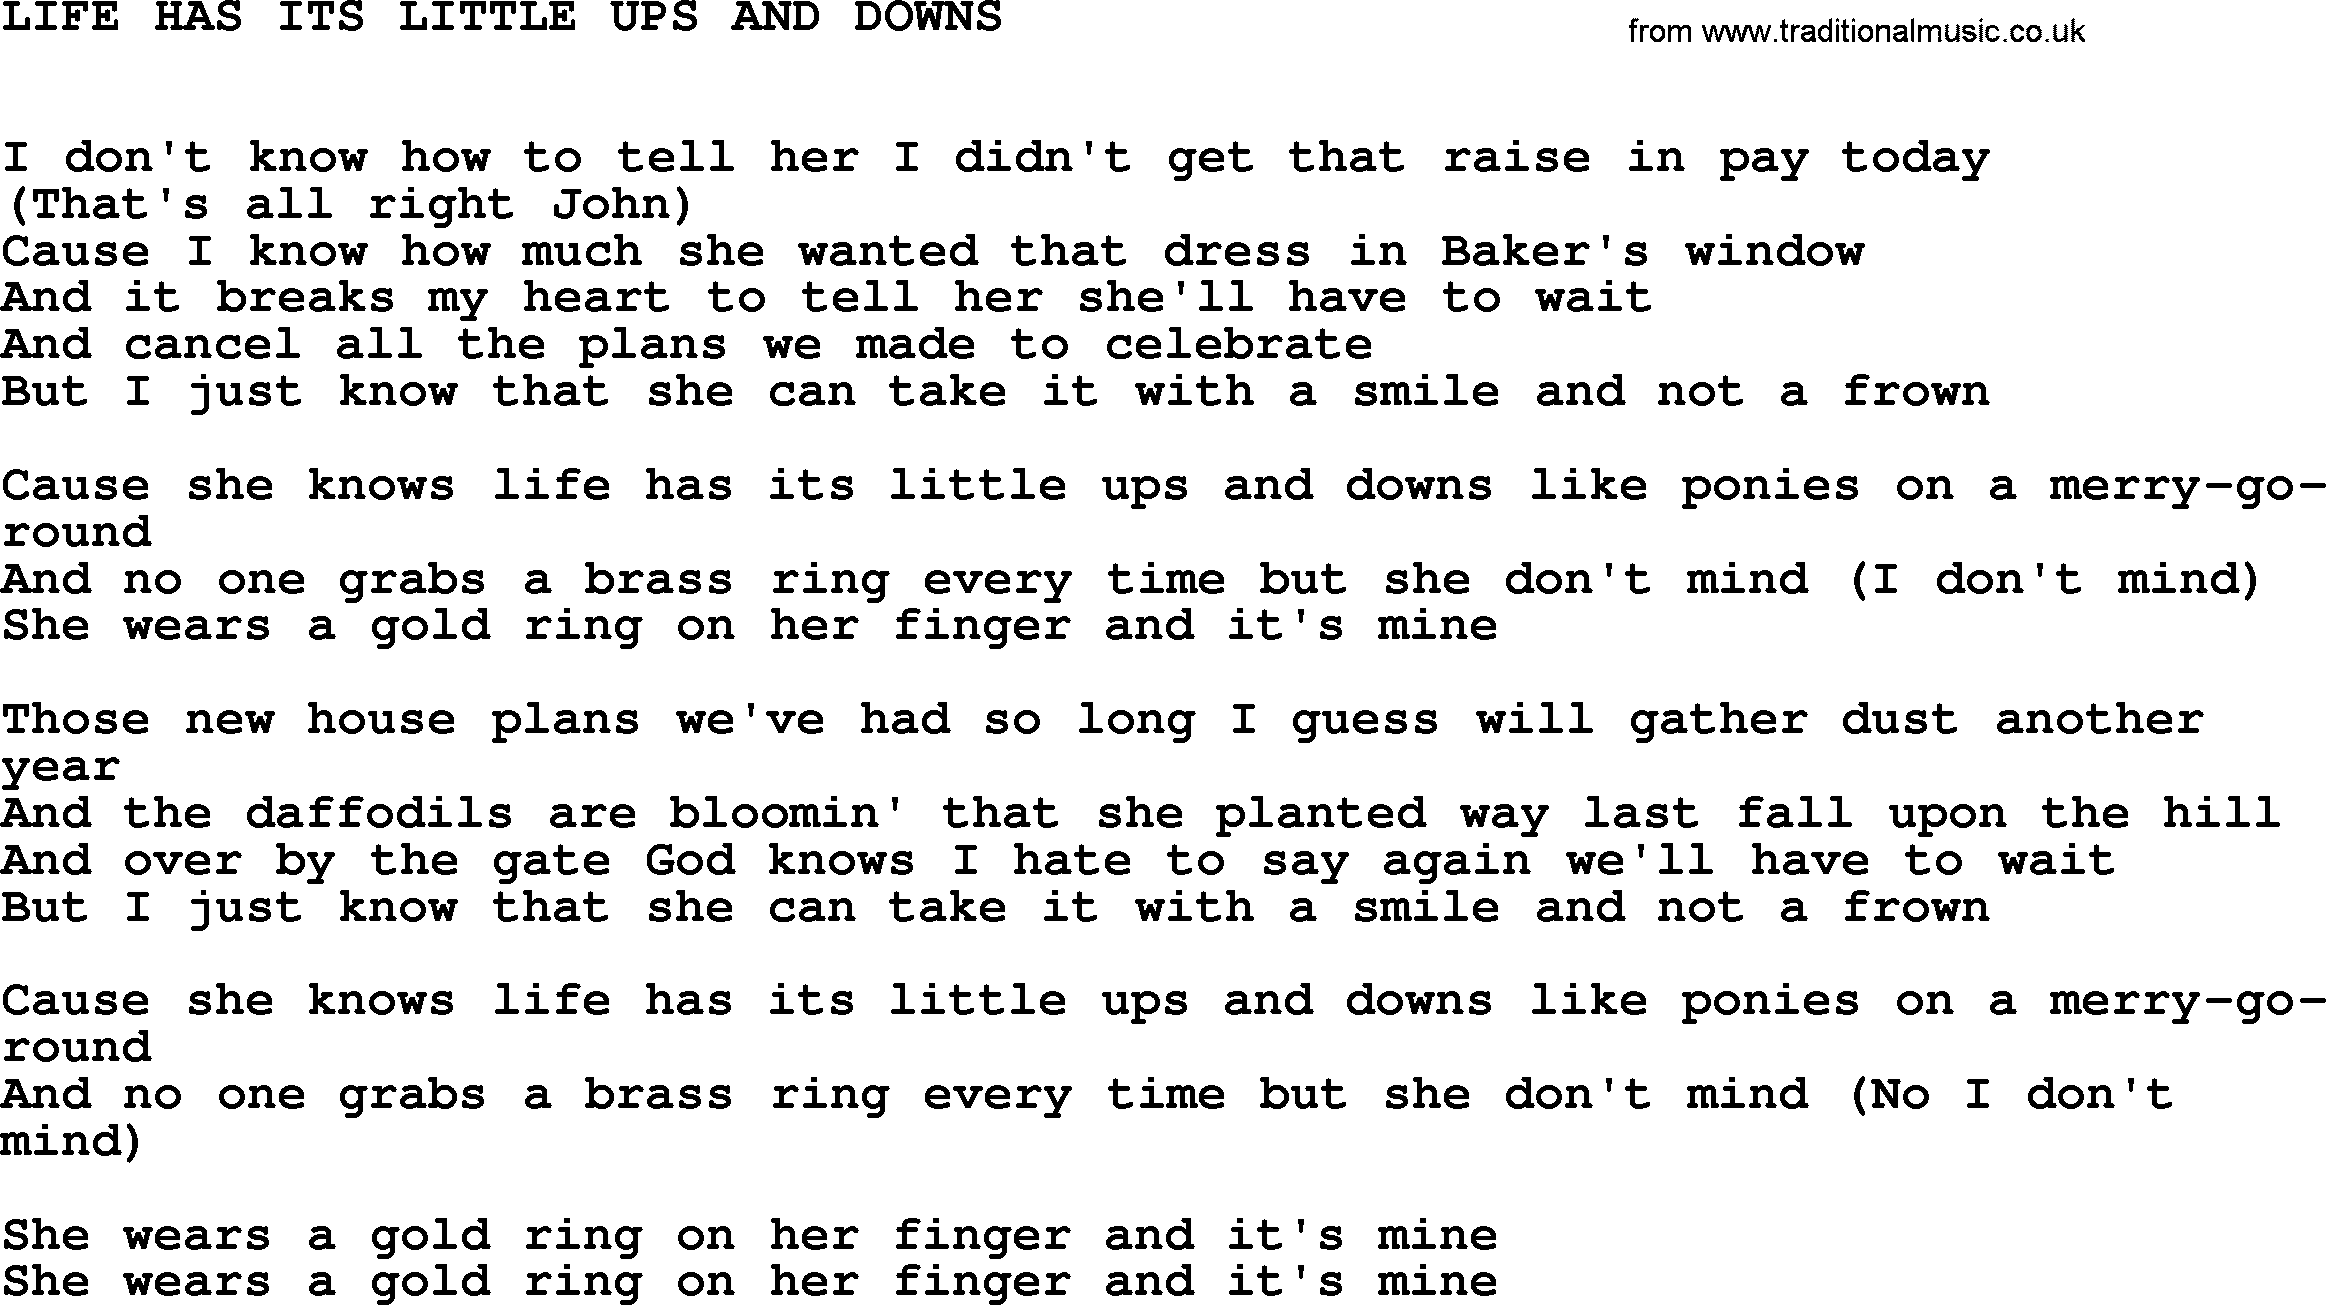 Johnny Cash song Life Has Its Little Ups And Downs.txt lyrics